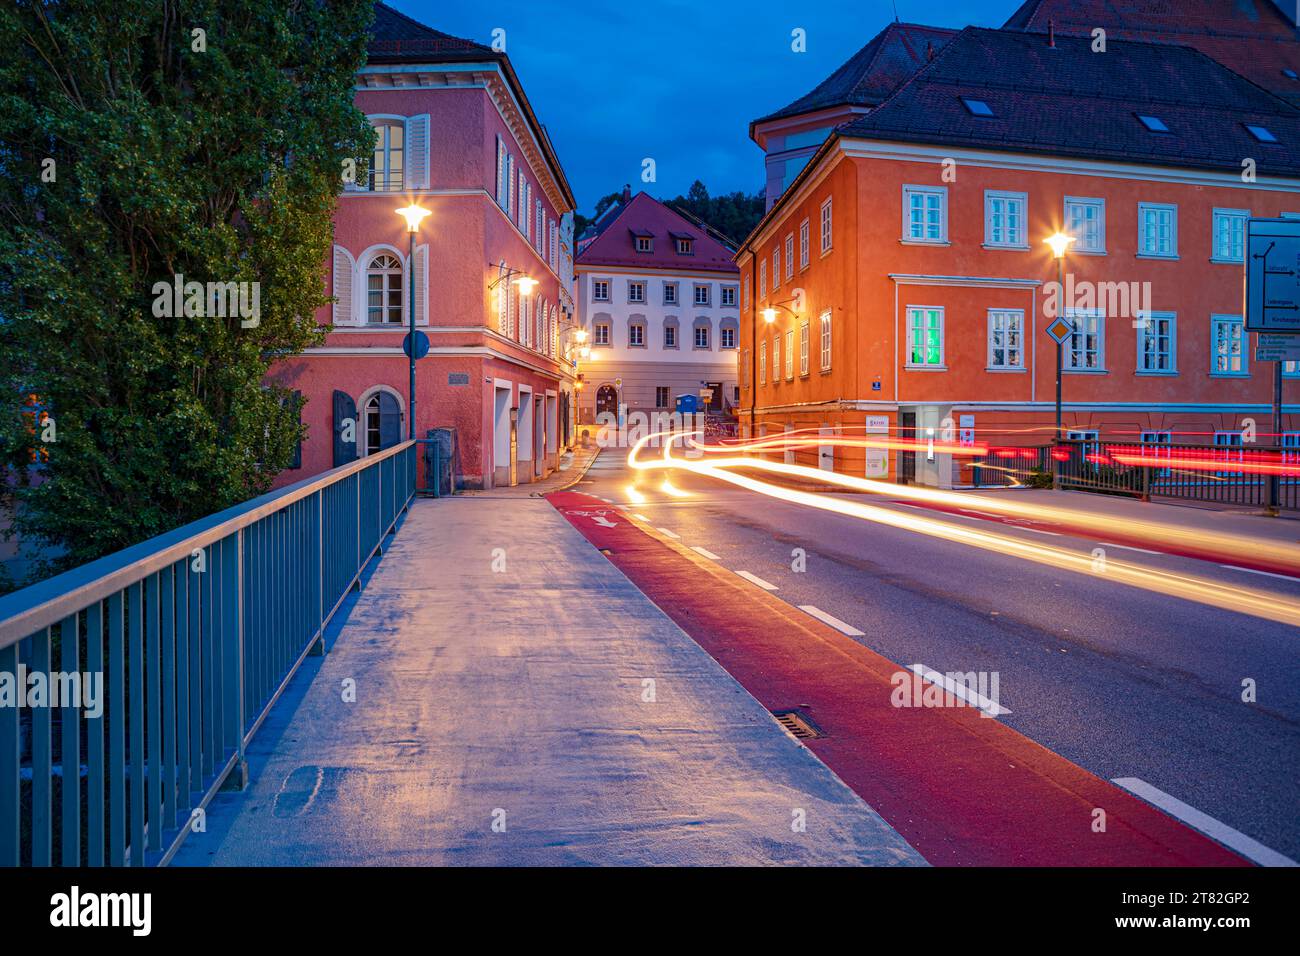 St Mary's Bridge with a view of Mariahilfstrasse in Passau, Bavaria, Germany Stock Photo